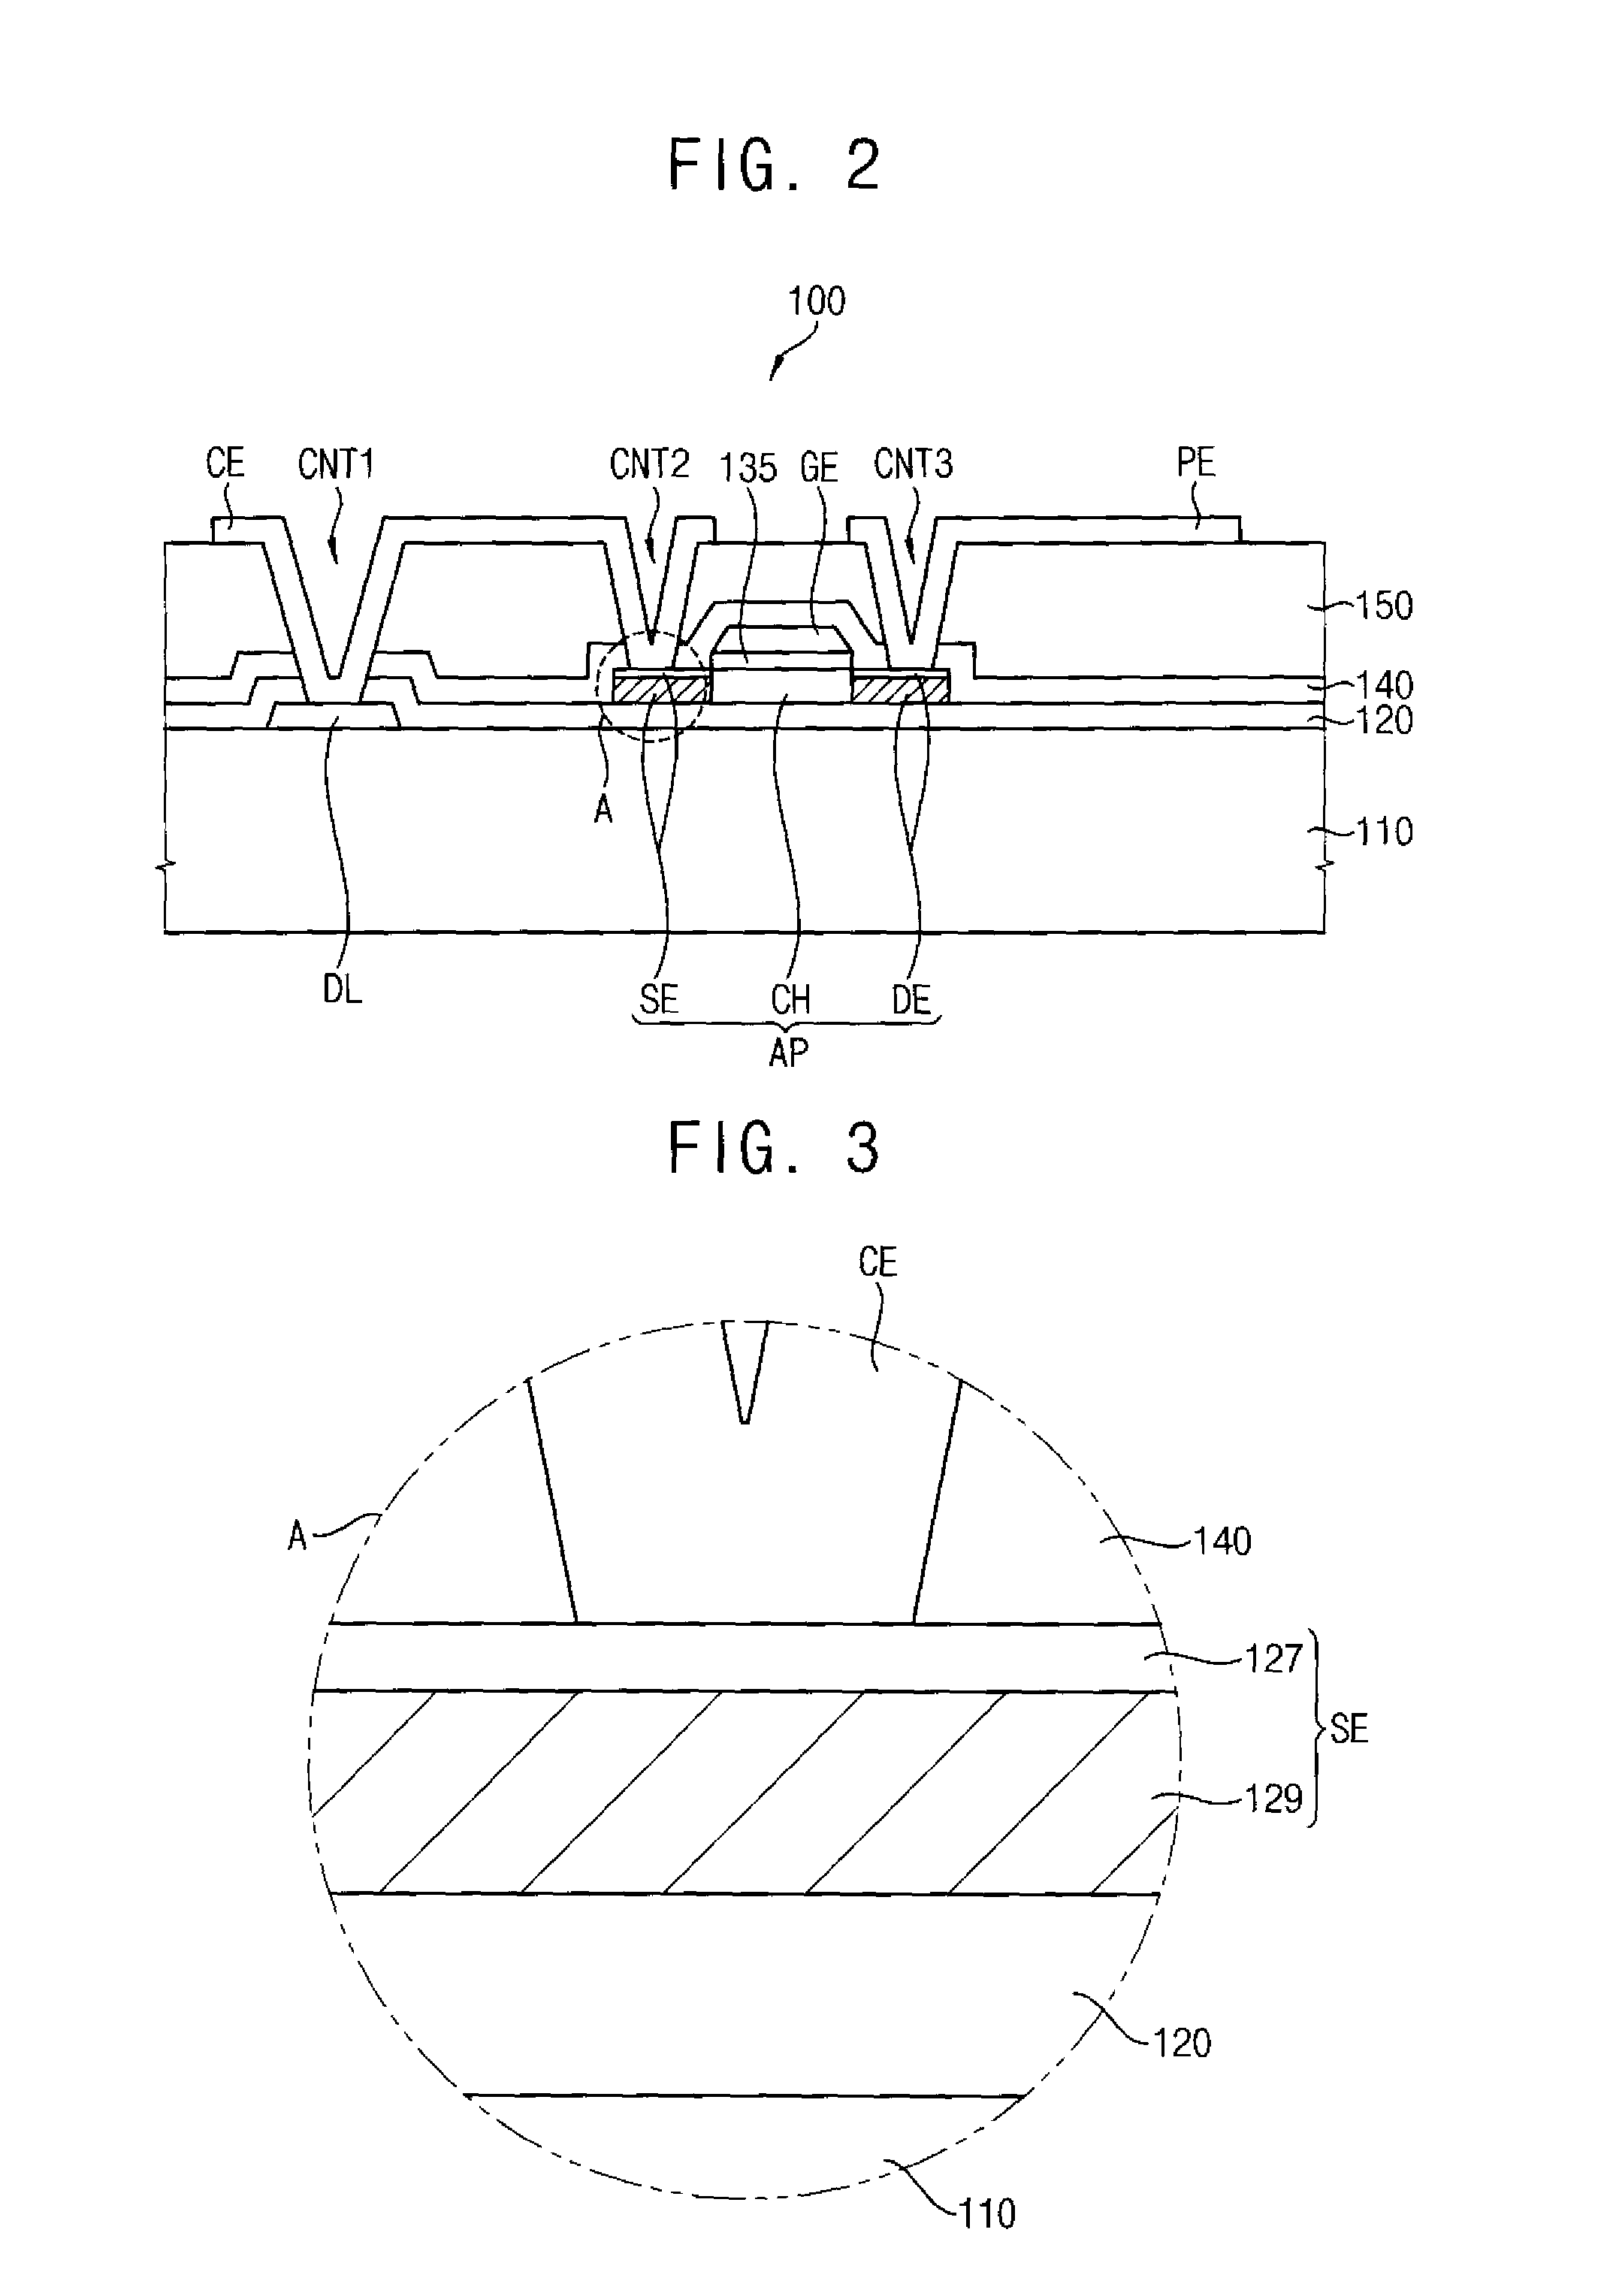 Thin film transistor substrate including a fluorine layer in an active pattern